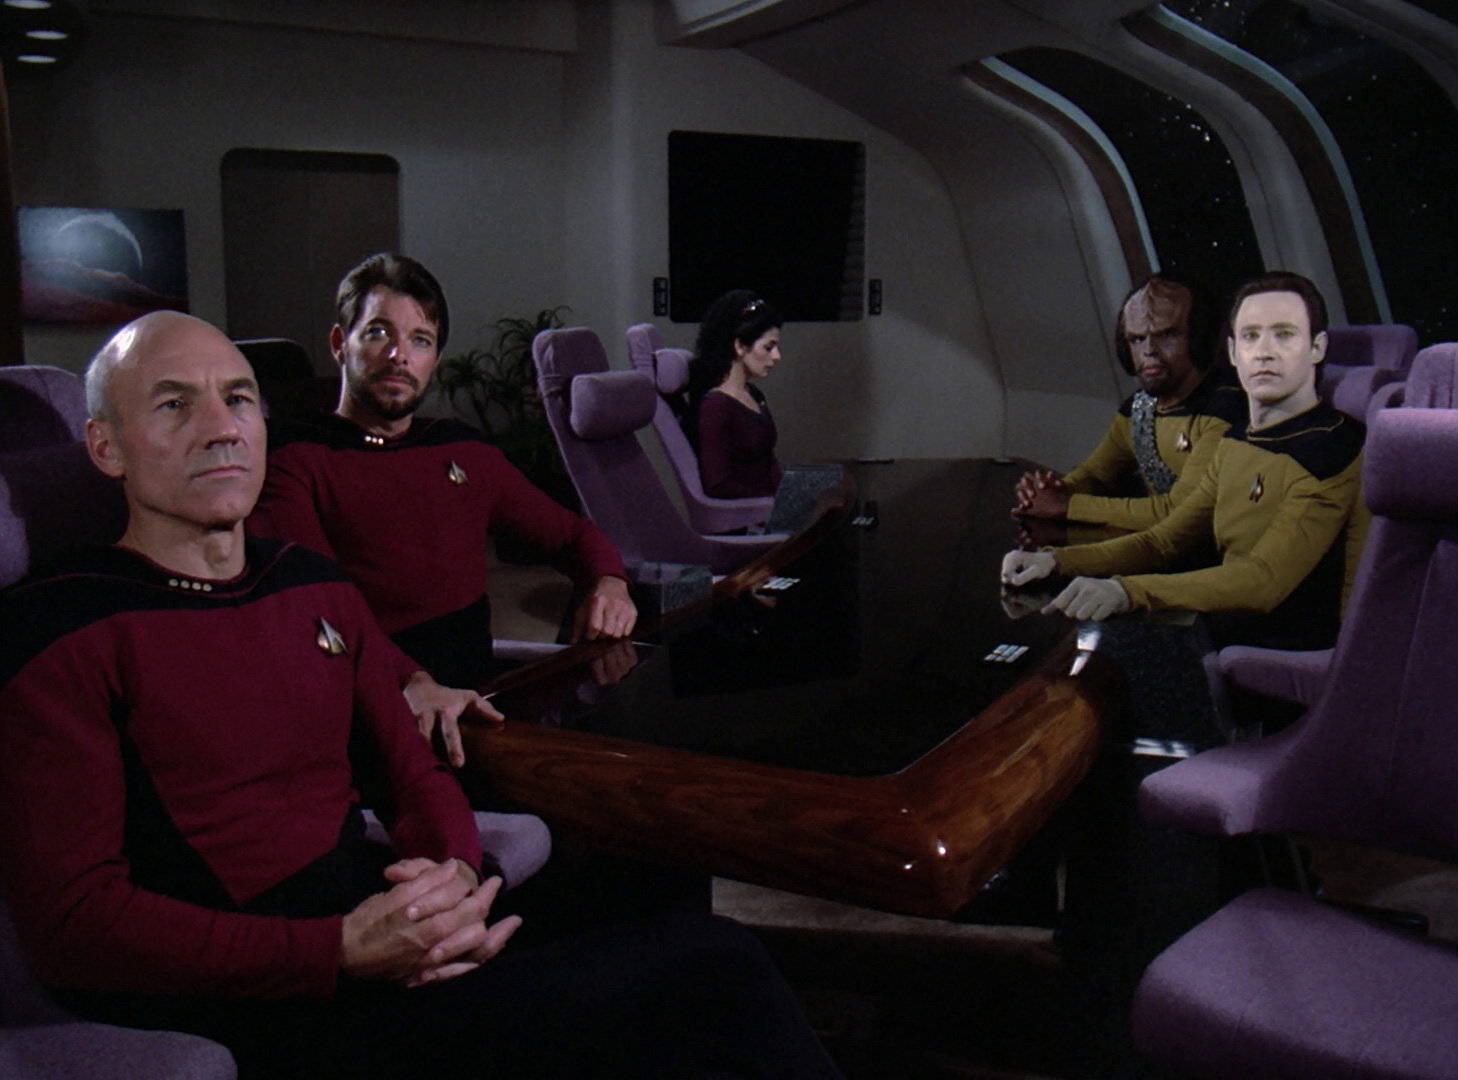 Picard, Riker, Data, Worf, Troi and La Forge in the conference room